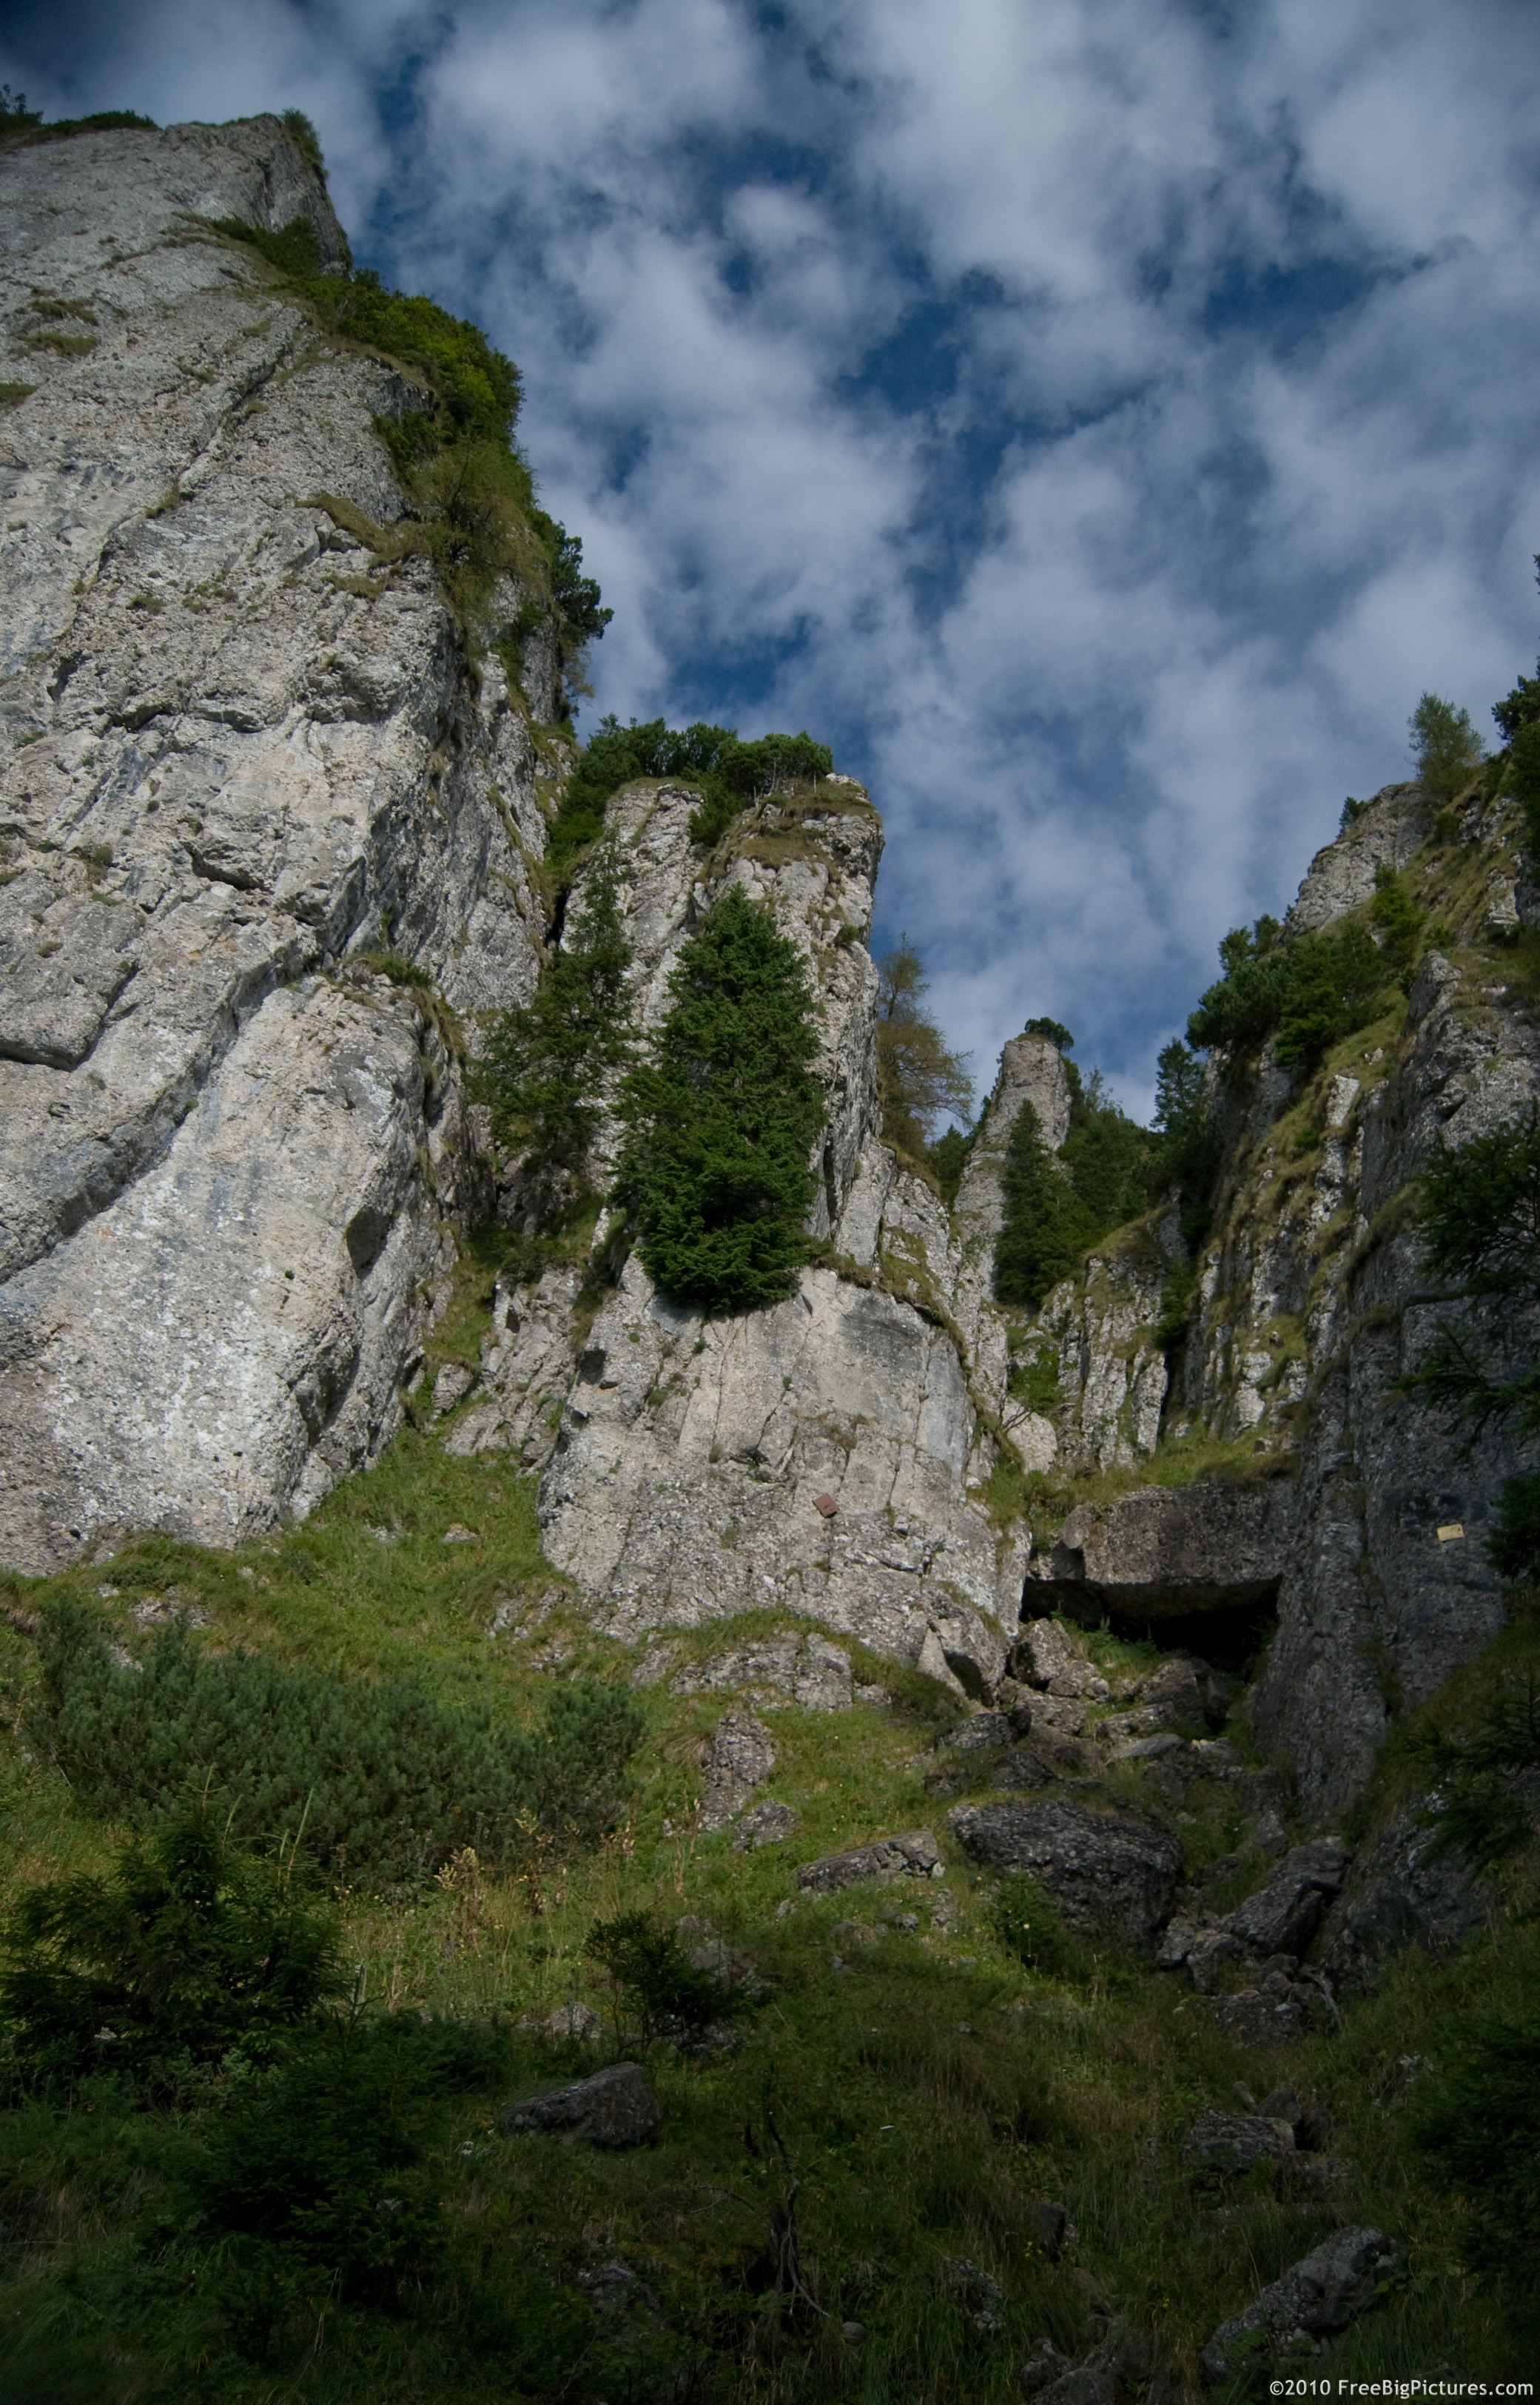 Image of the Bears Trough – Jgheabul Ursilor - a beautiful place in the Ceahlau Massif